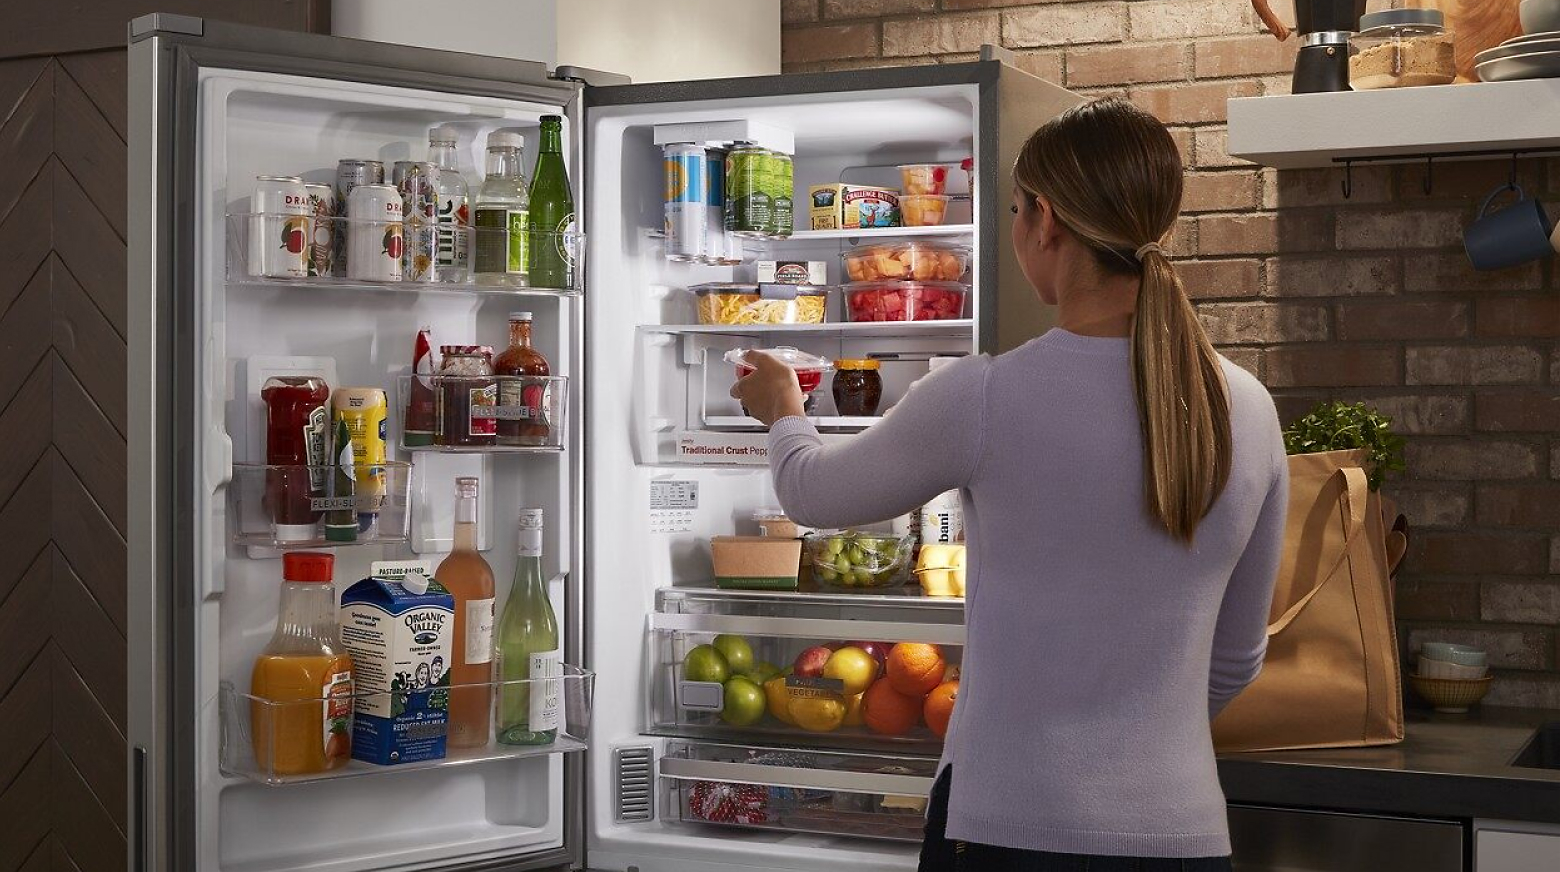 Refrigerator Sizes: How to Measure Fridge Dimensions | Whirlpool